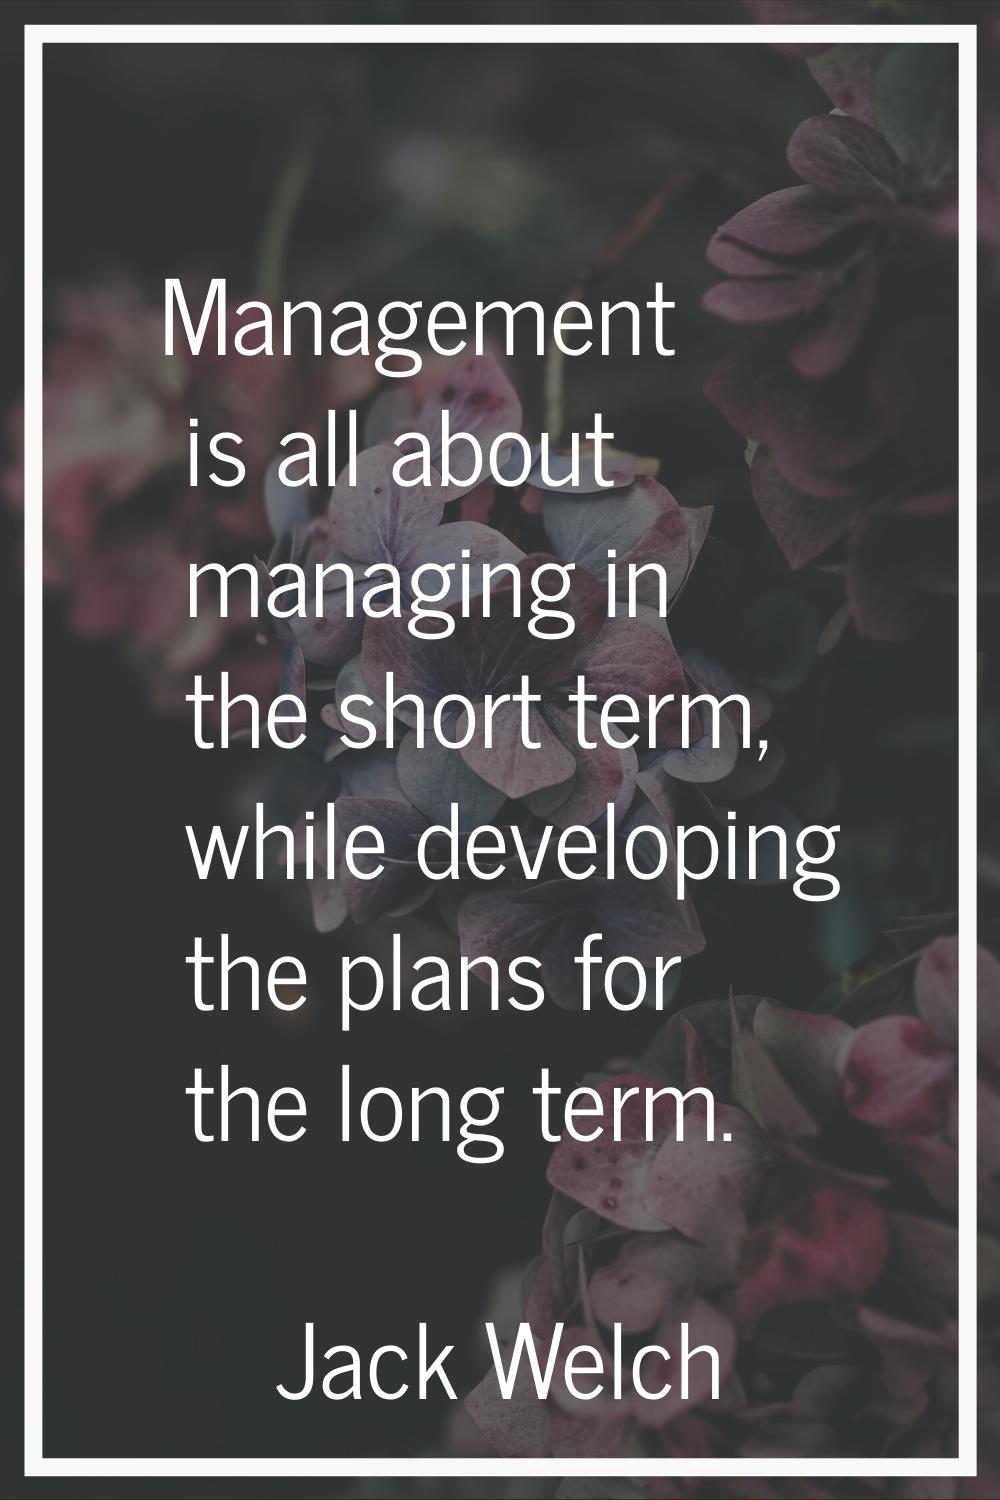 Management is all about managing in the short term, while developing the plans for the long term.